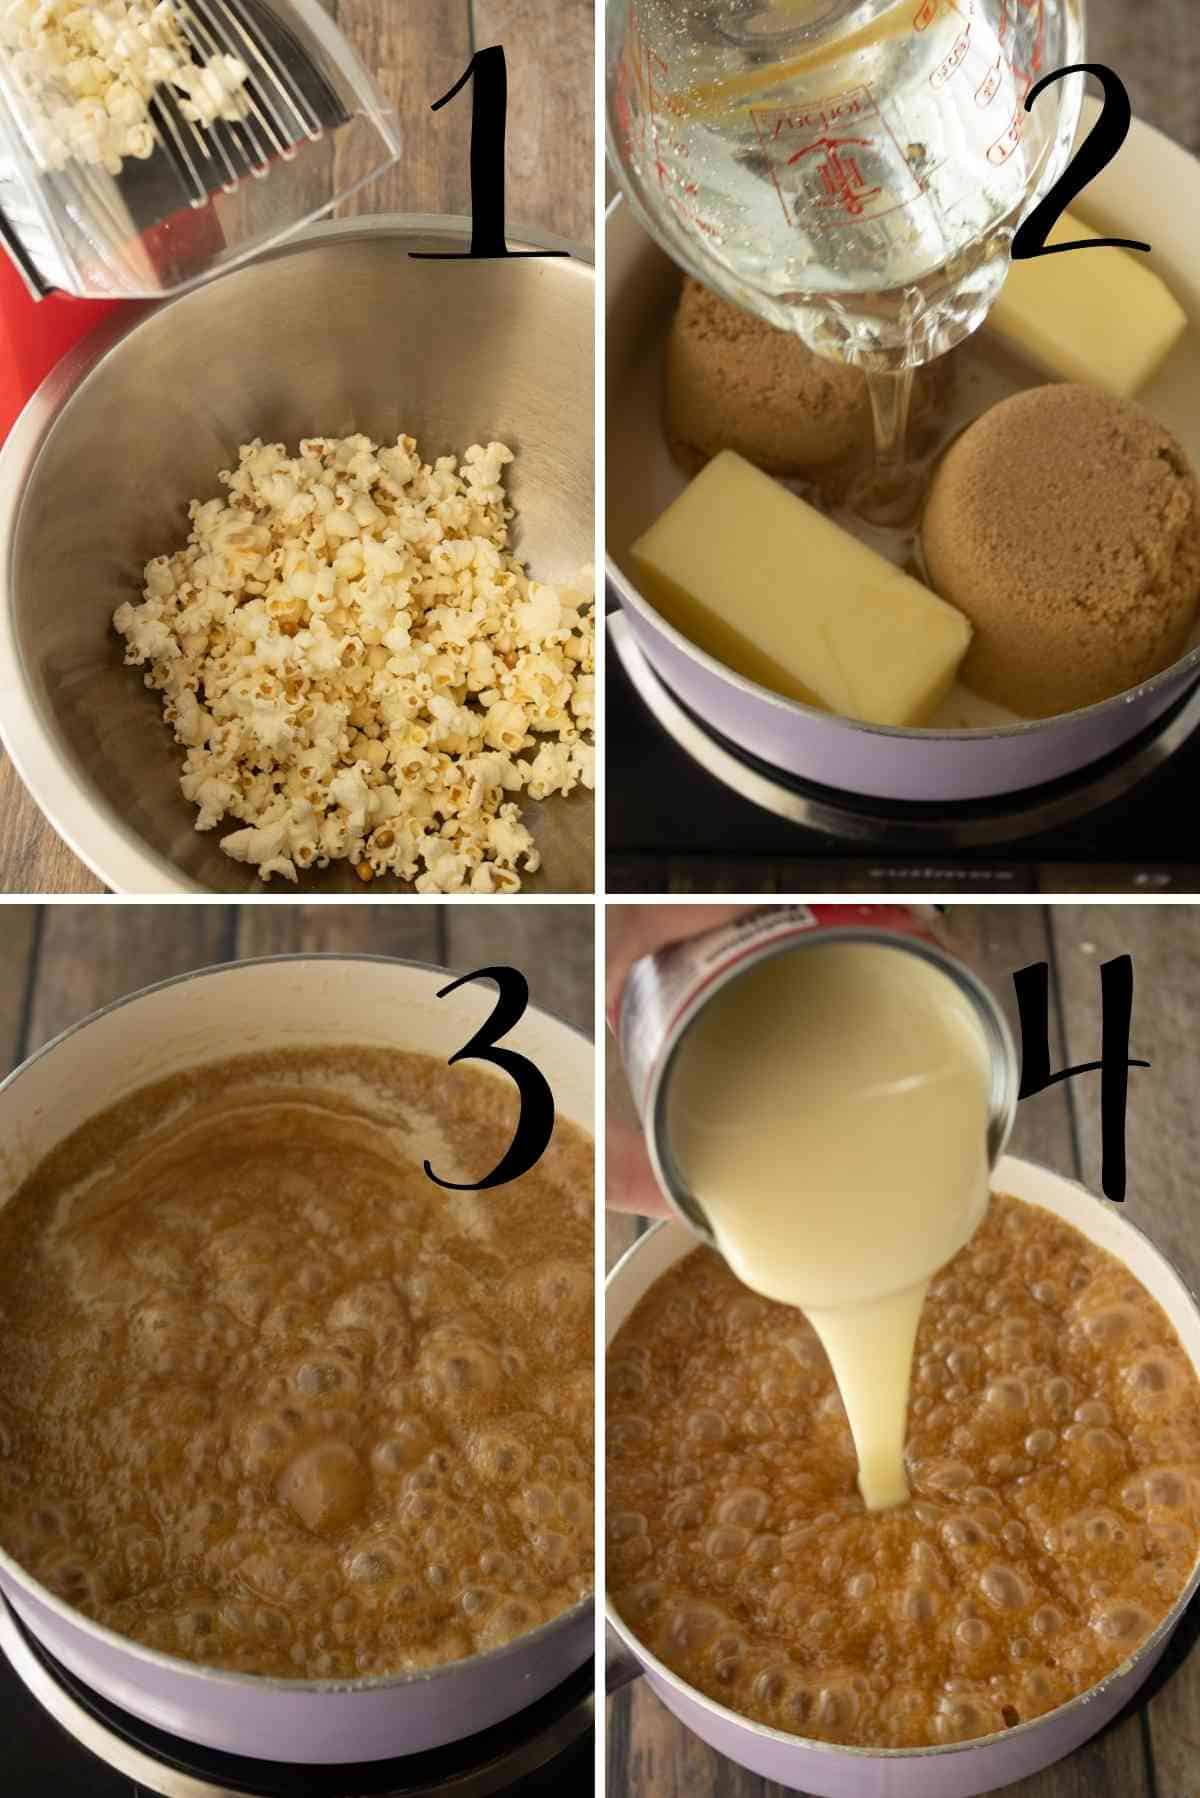 Pop the popcorn and whip up the caramel mixture!